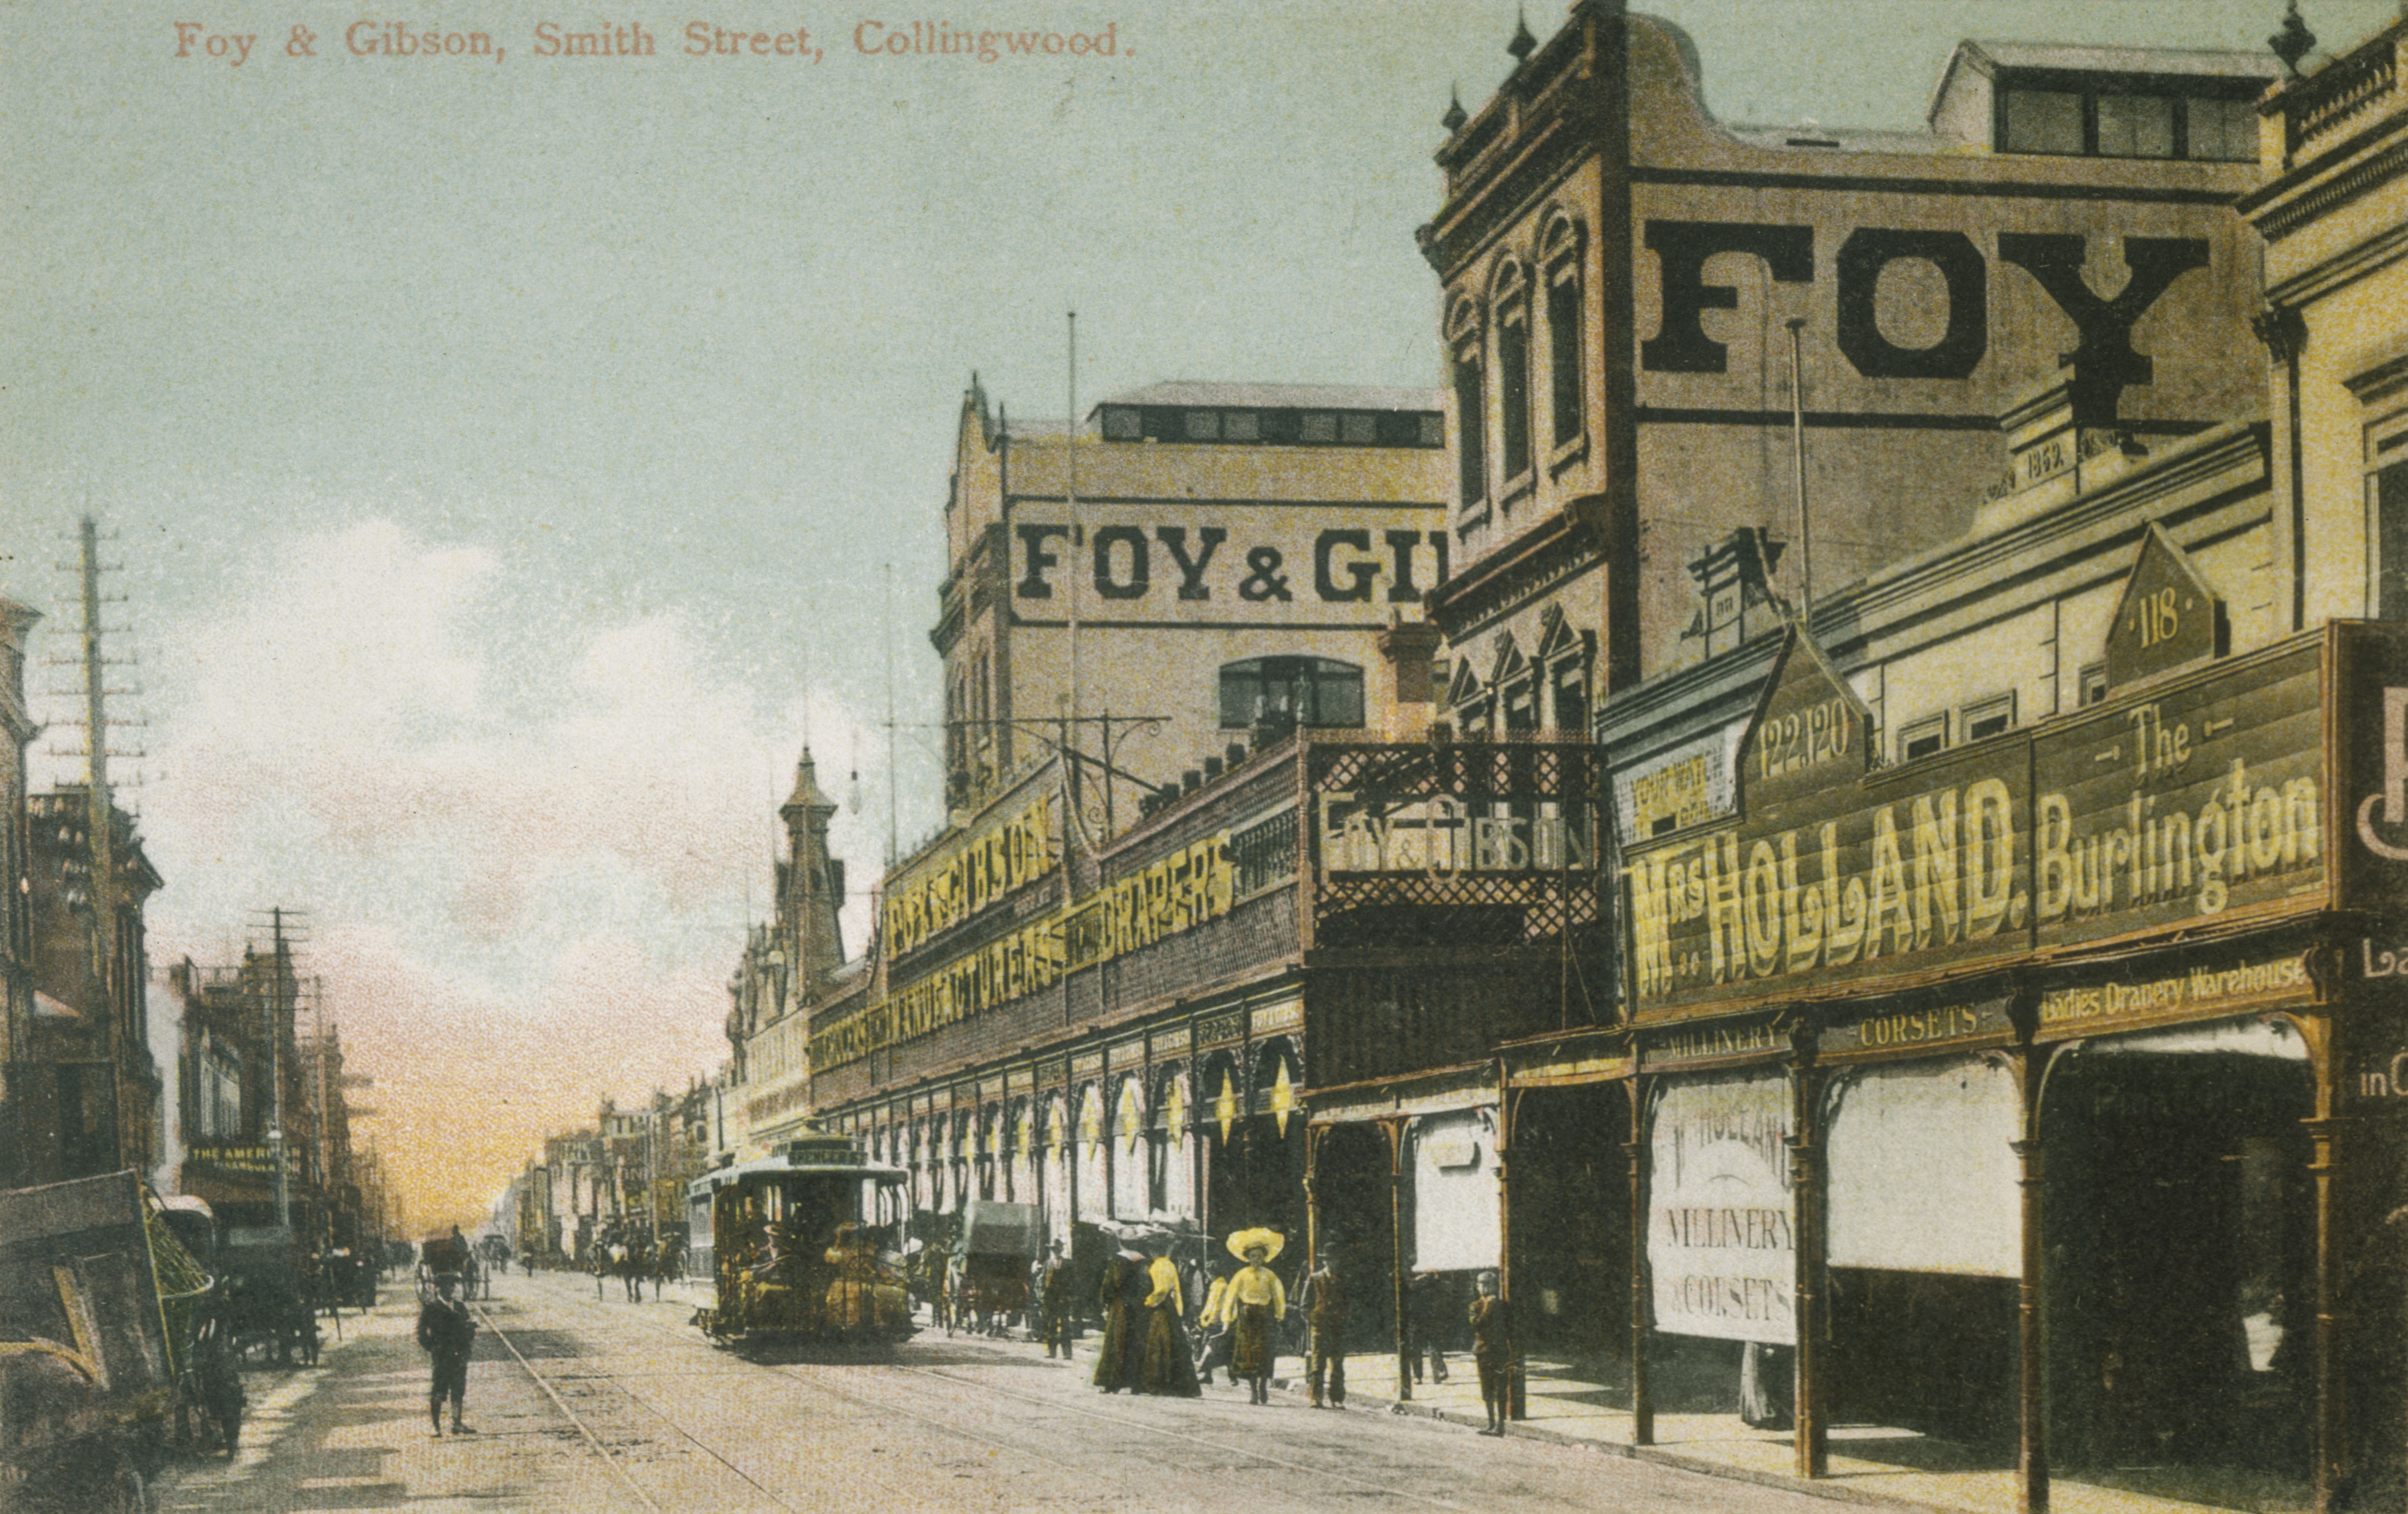 Foy & Gibson, Smith Street, Collingwood, c1906. Photographer unknown. State Library Victoria, H90.160/1012.